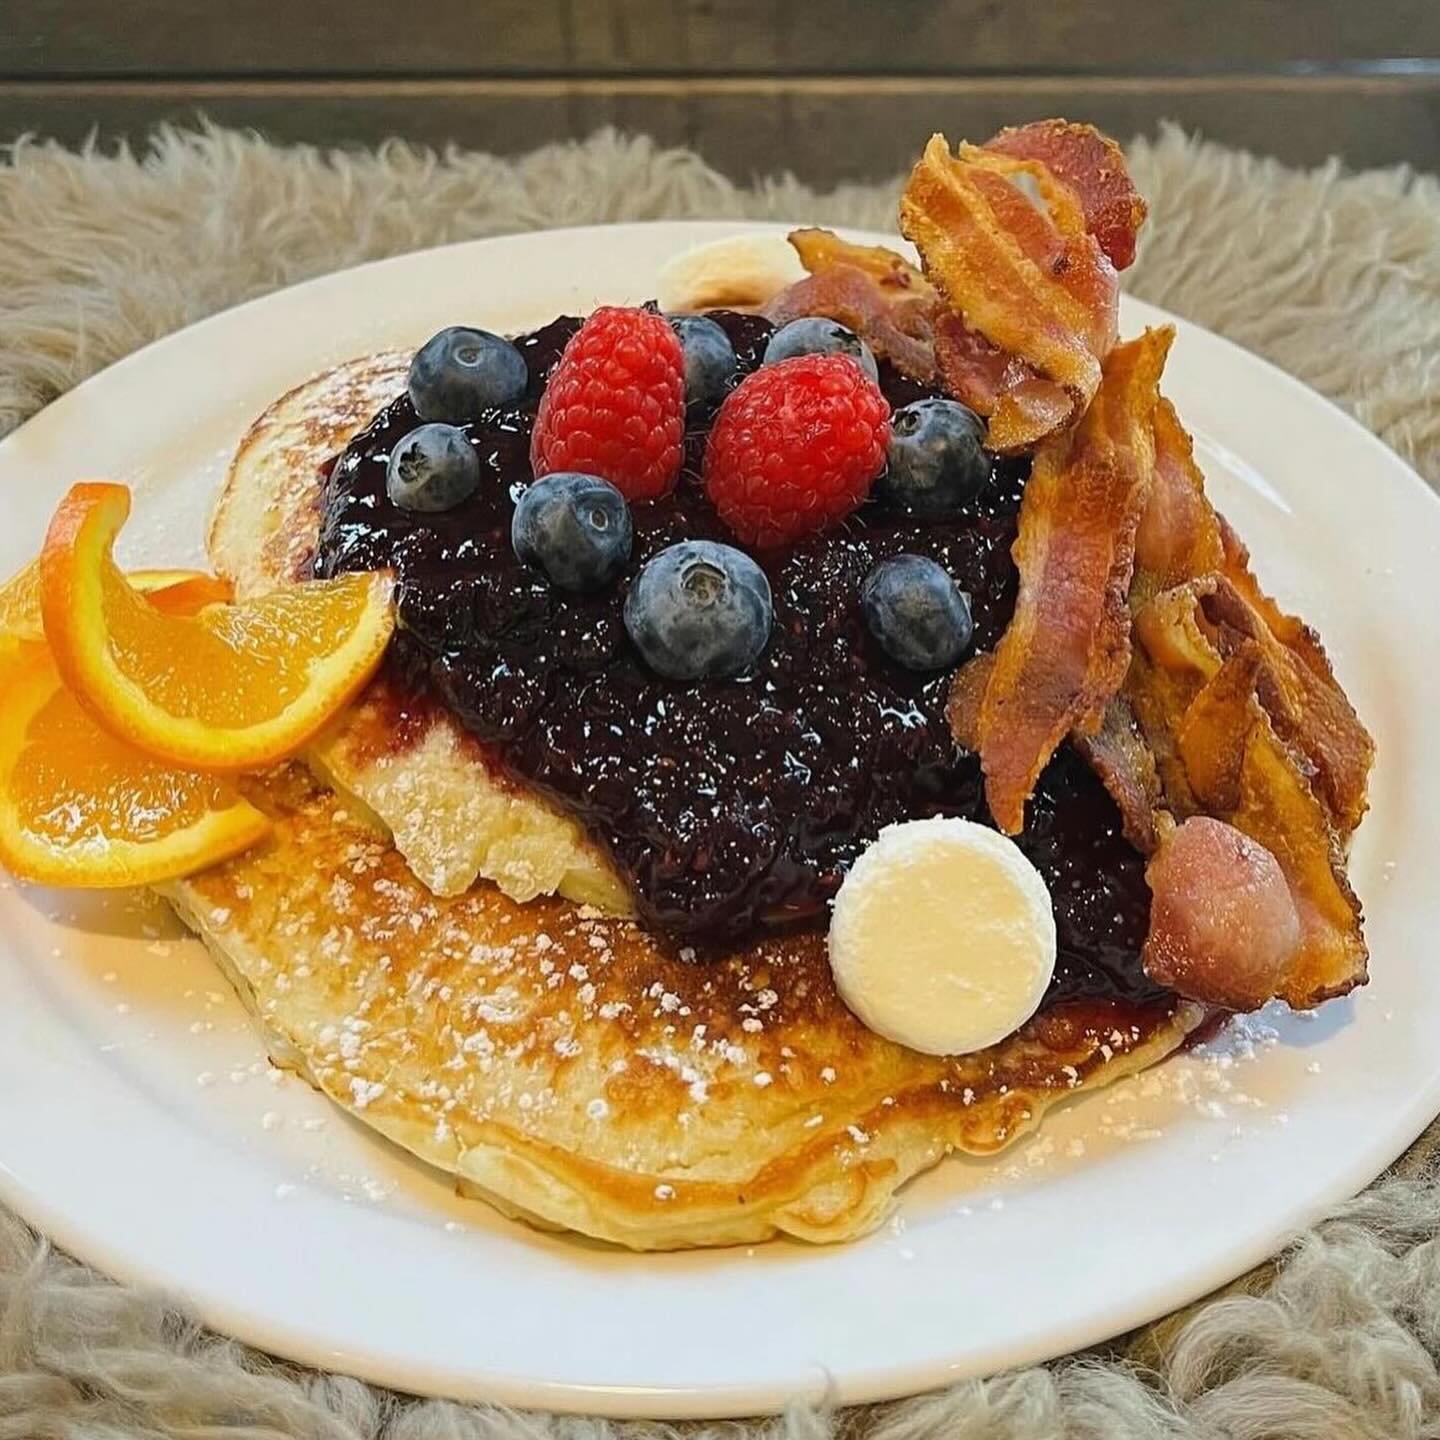 Weekends spent brunching at @wrccafebar &gt;

Whether you&rsquo;re a pancake lover, a benny enthusiast or a breakfast sandwich connoisseur, we&rsquo;ve got you covered!! 🥞 🍳 🍓

🍊$8 Mimosa
🍅$9 Single Caesar + $13 Double Caesar

Head on down to th